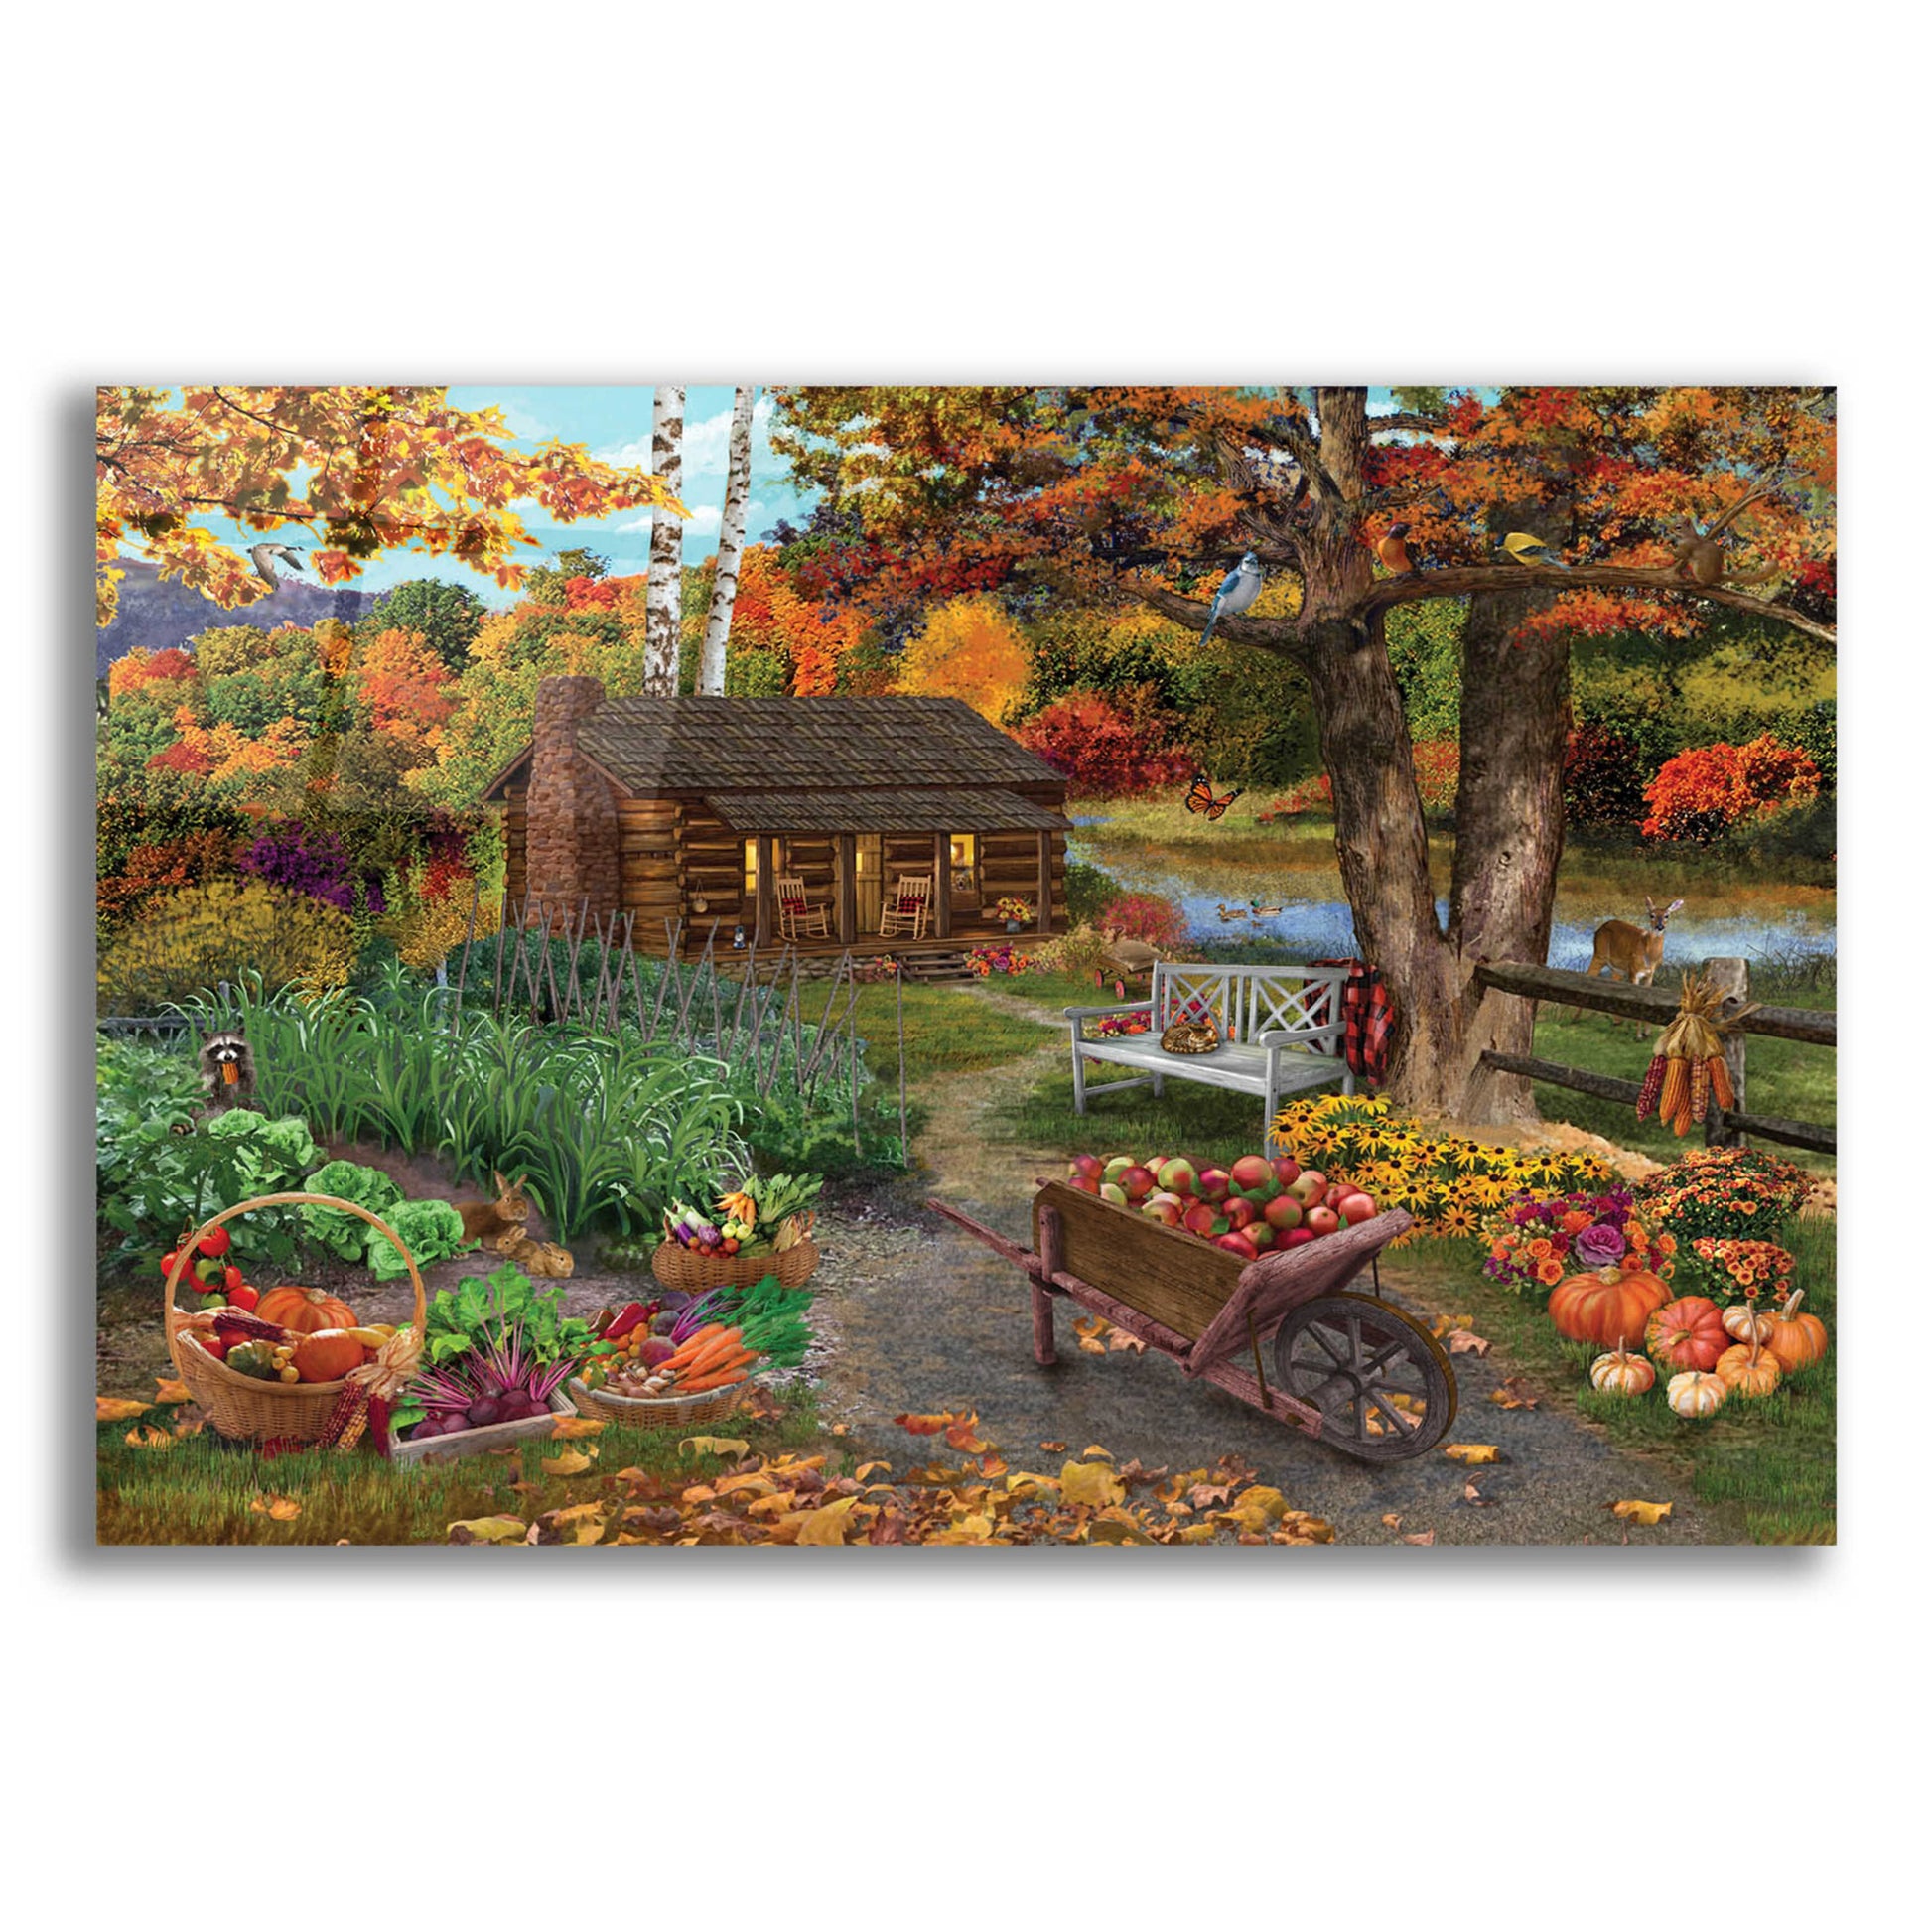 Epic Art 'Harvest at the Cabin' by Bigelow Illustrations, Acrylic Glass Wall Art,16x12